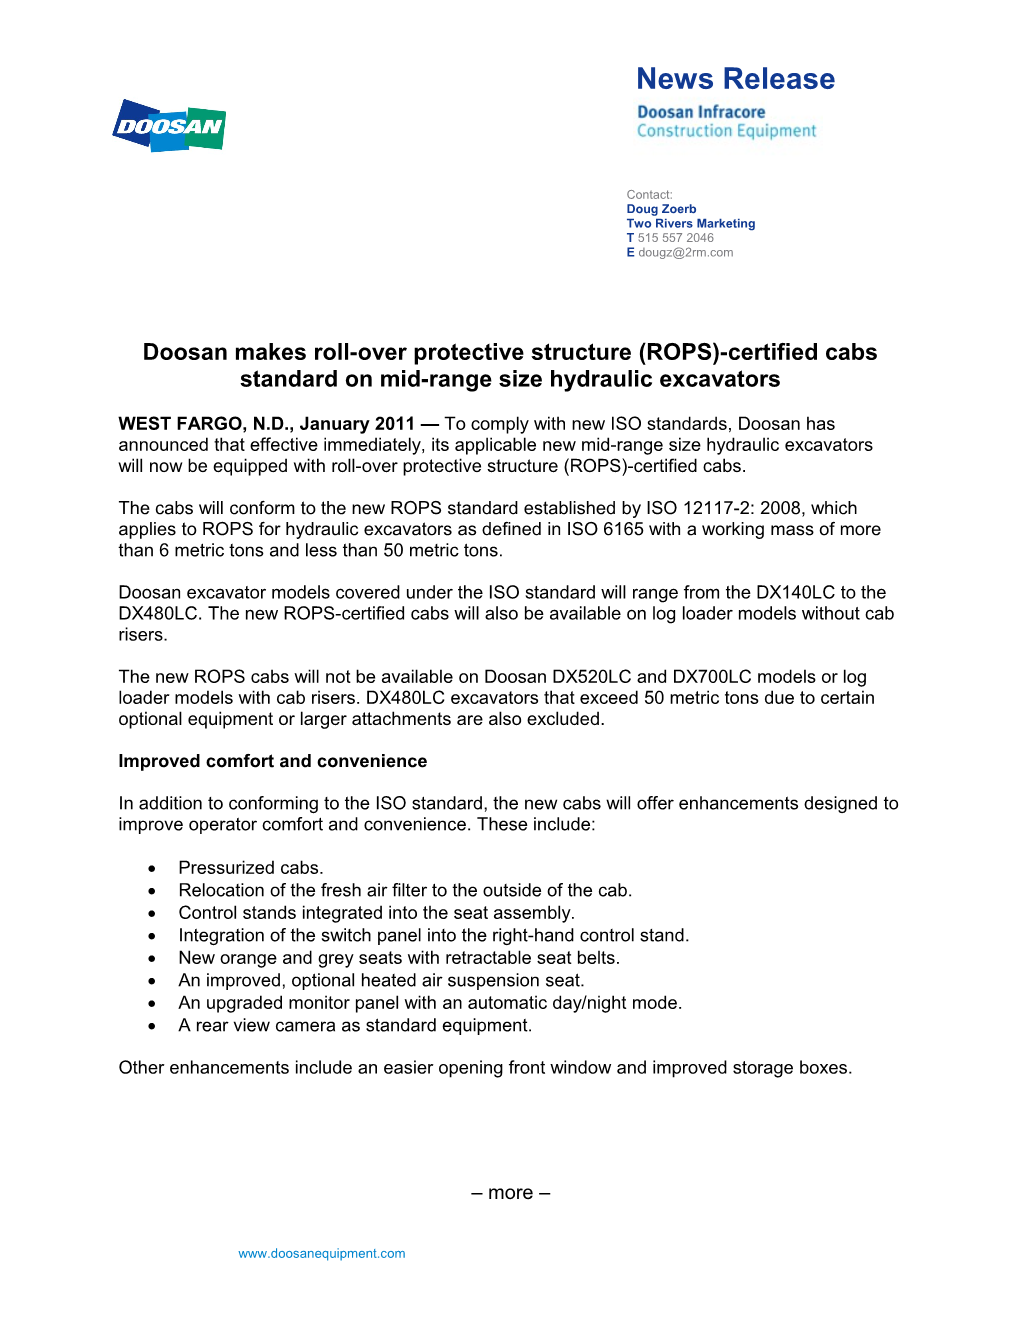 ROPS-Certified Cabs, Page 1